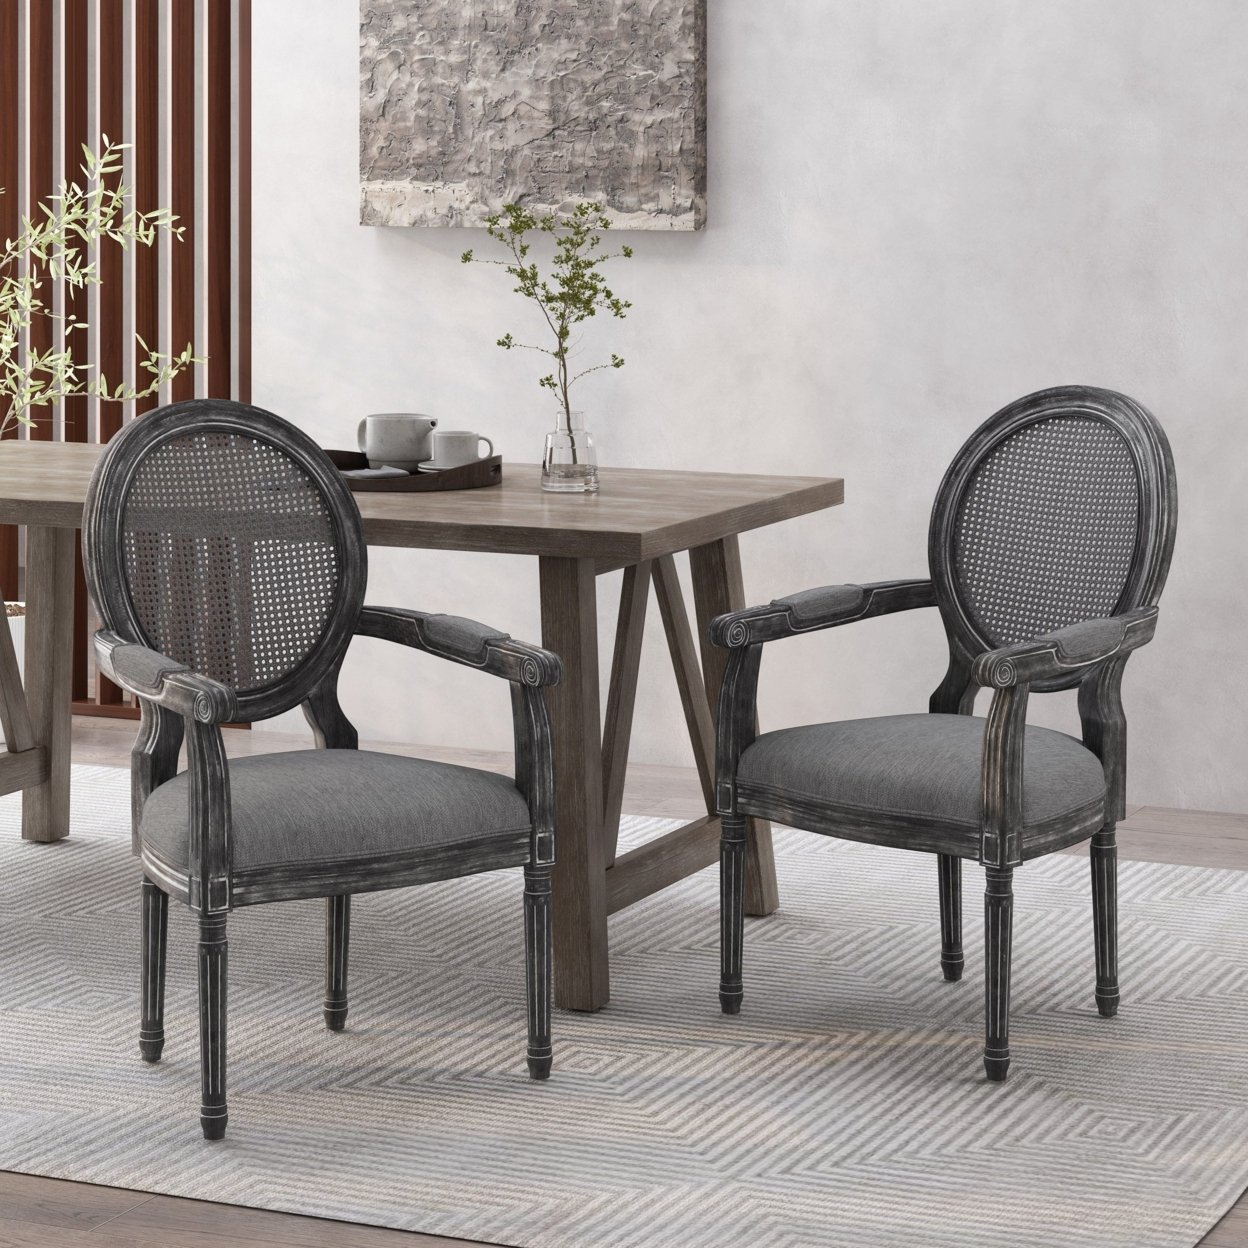 Aisenbrey French Country Wood And Cane Upholstered Dining Chair - Gray/beige, Set Of 2